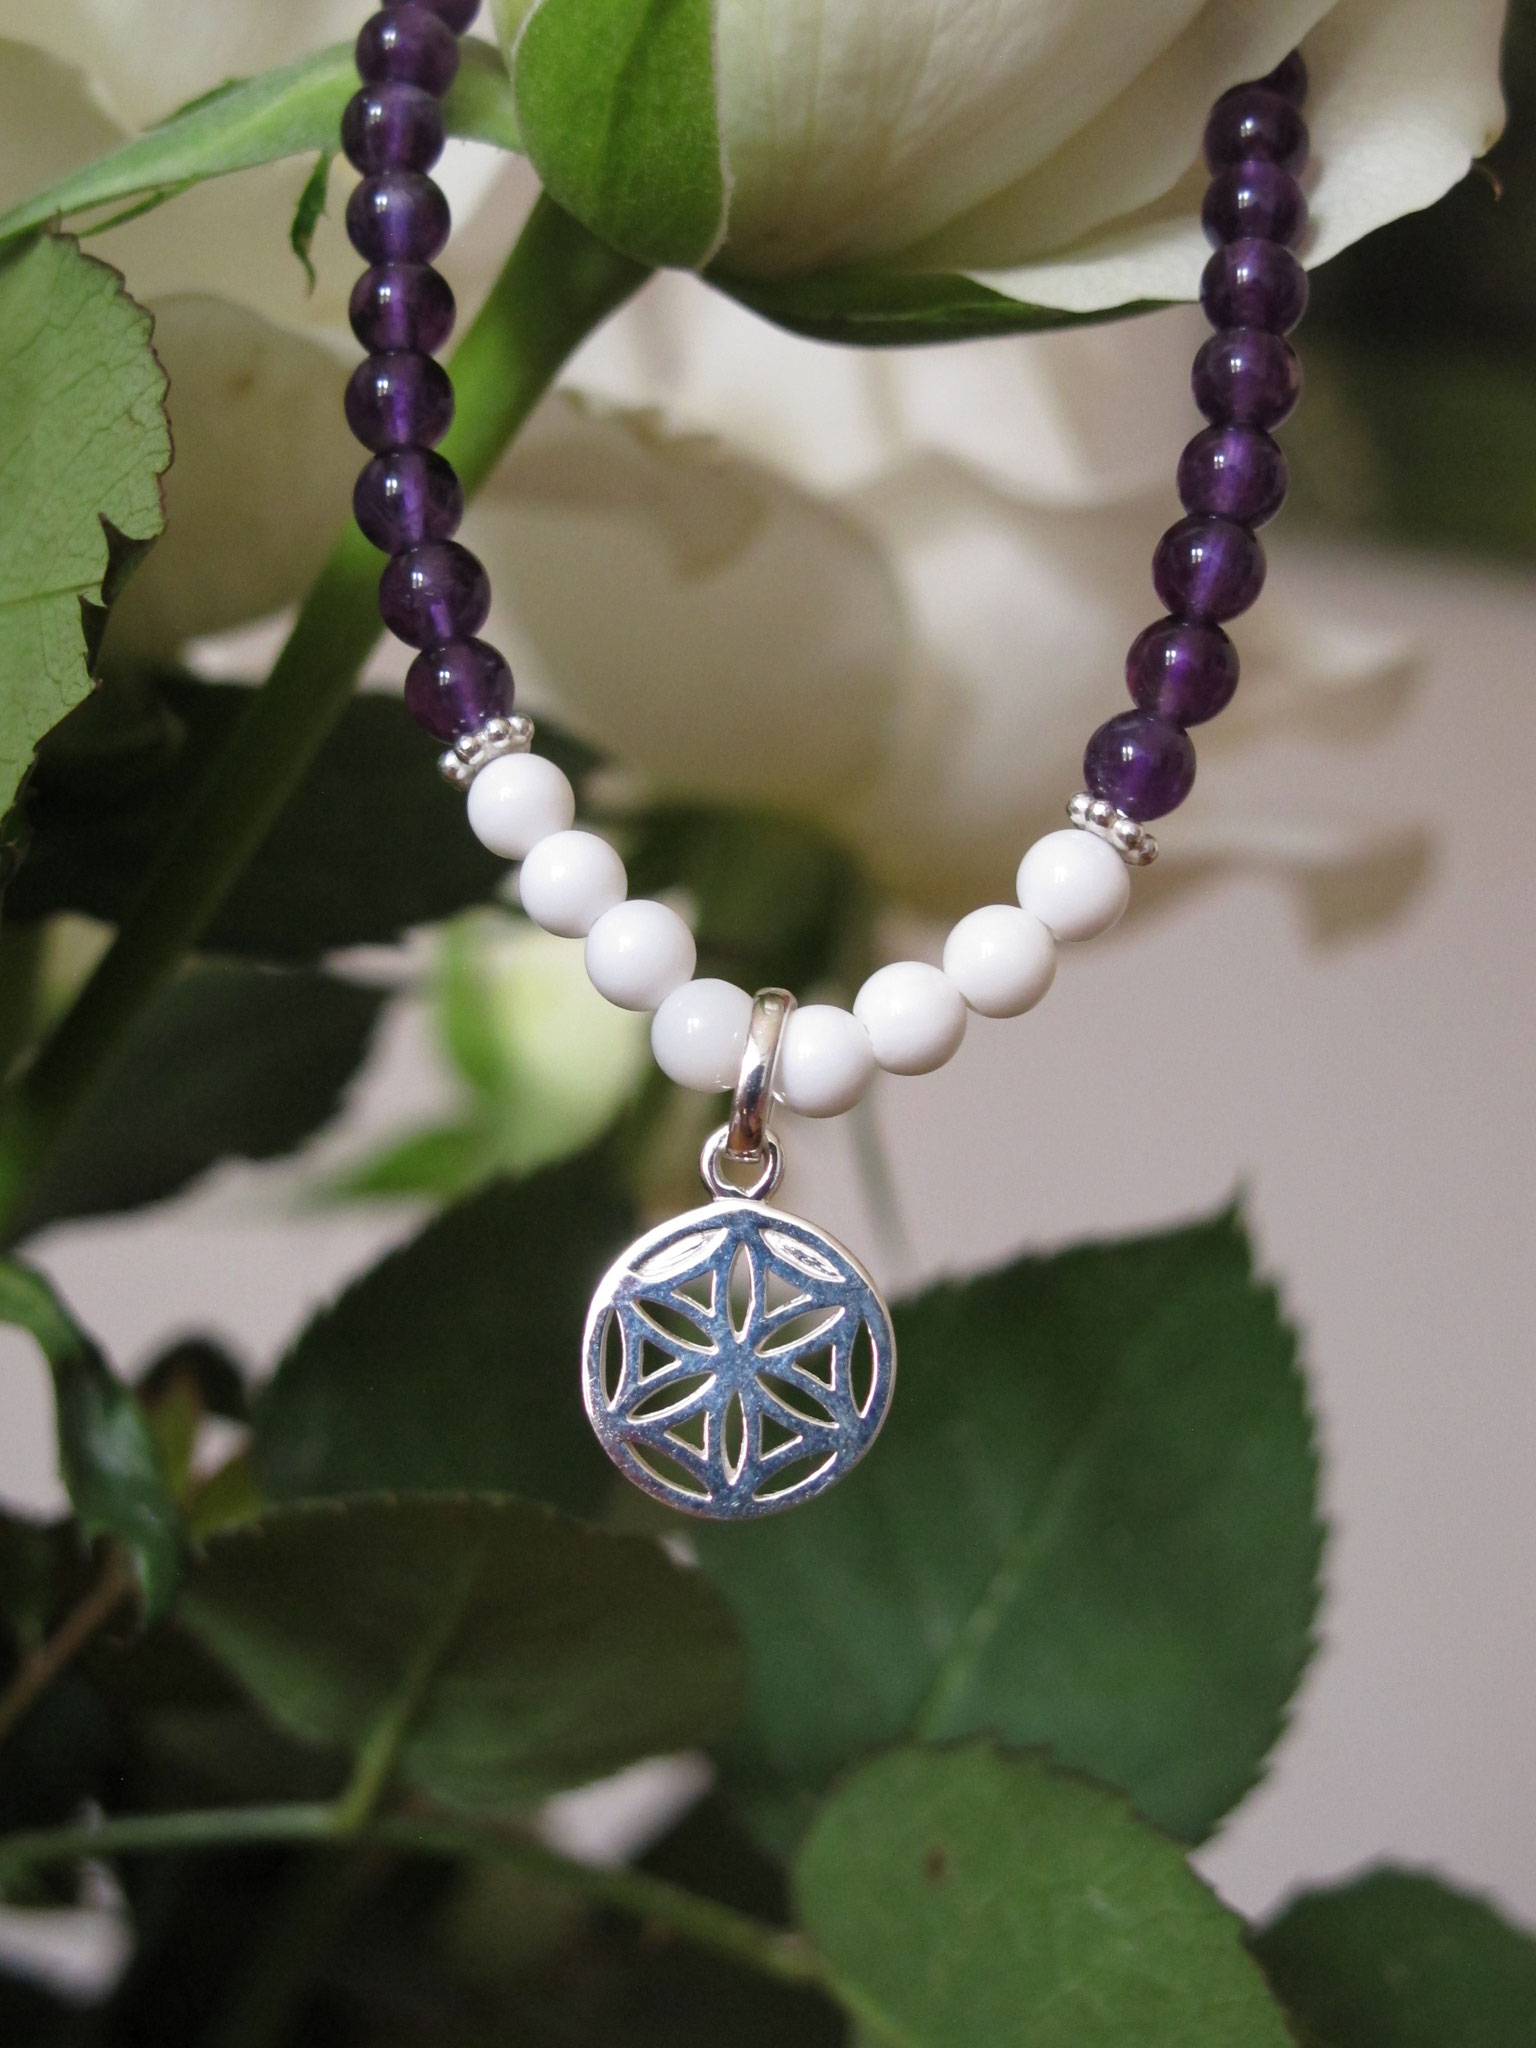 Amethyst meets white jade; 925 Sterling silver "flower of life" charm